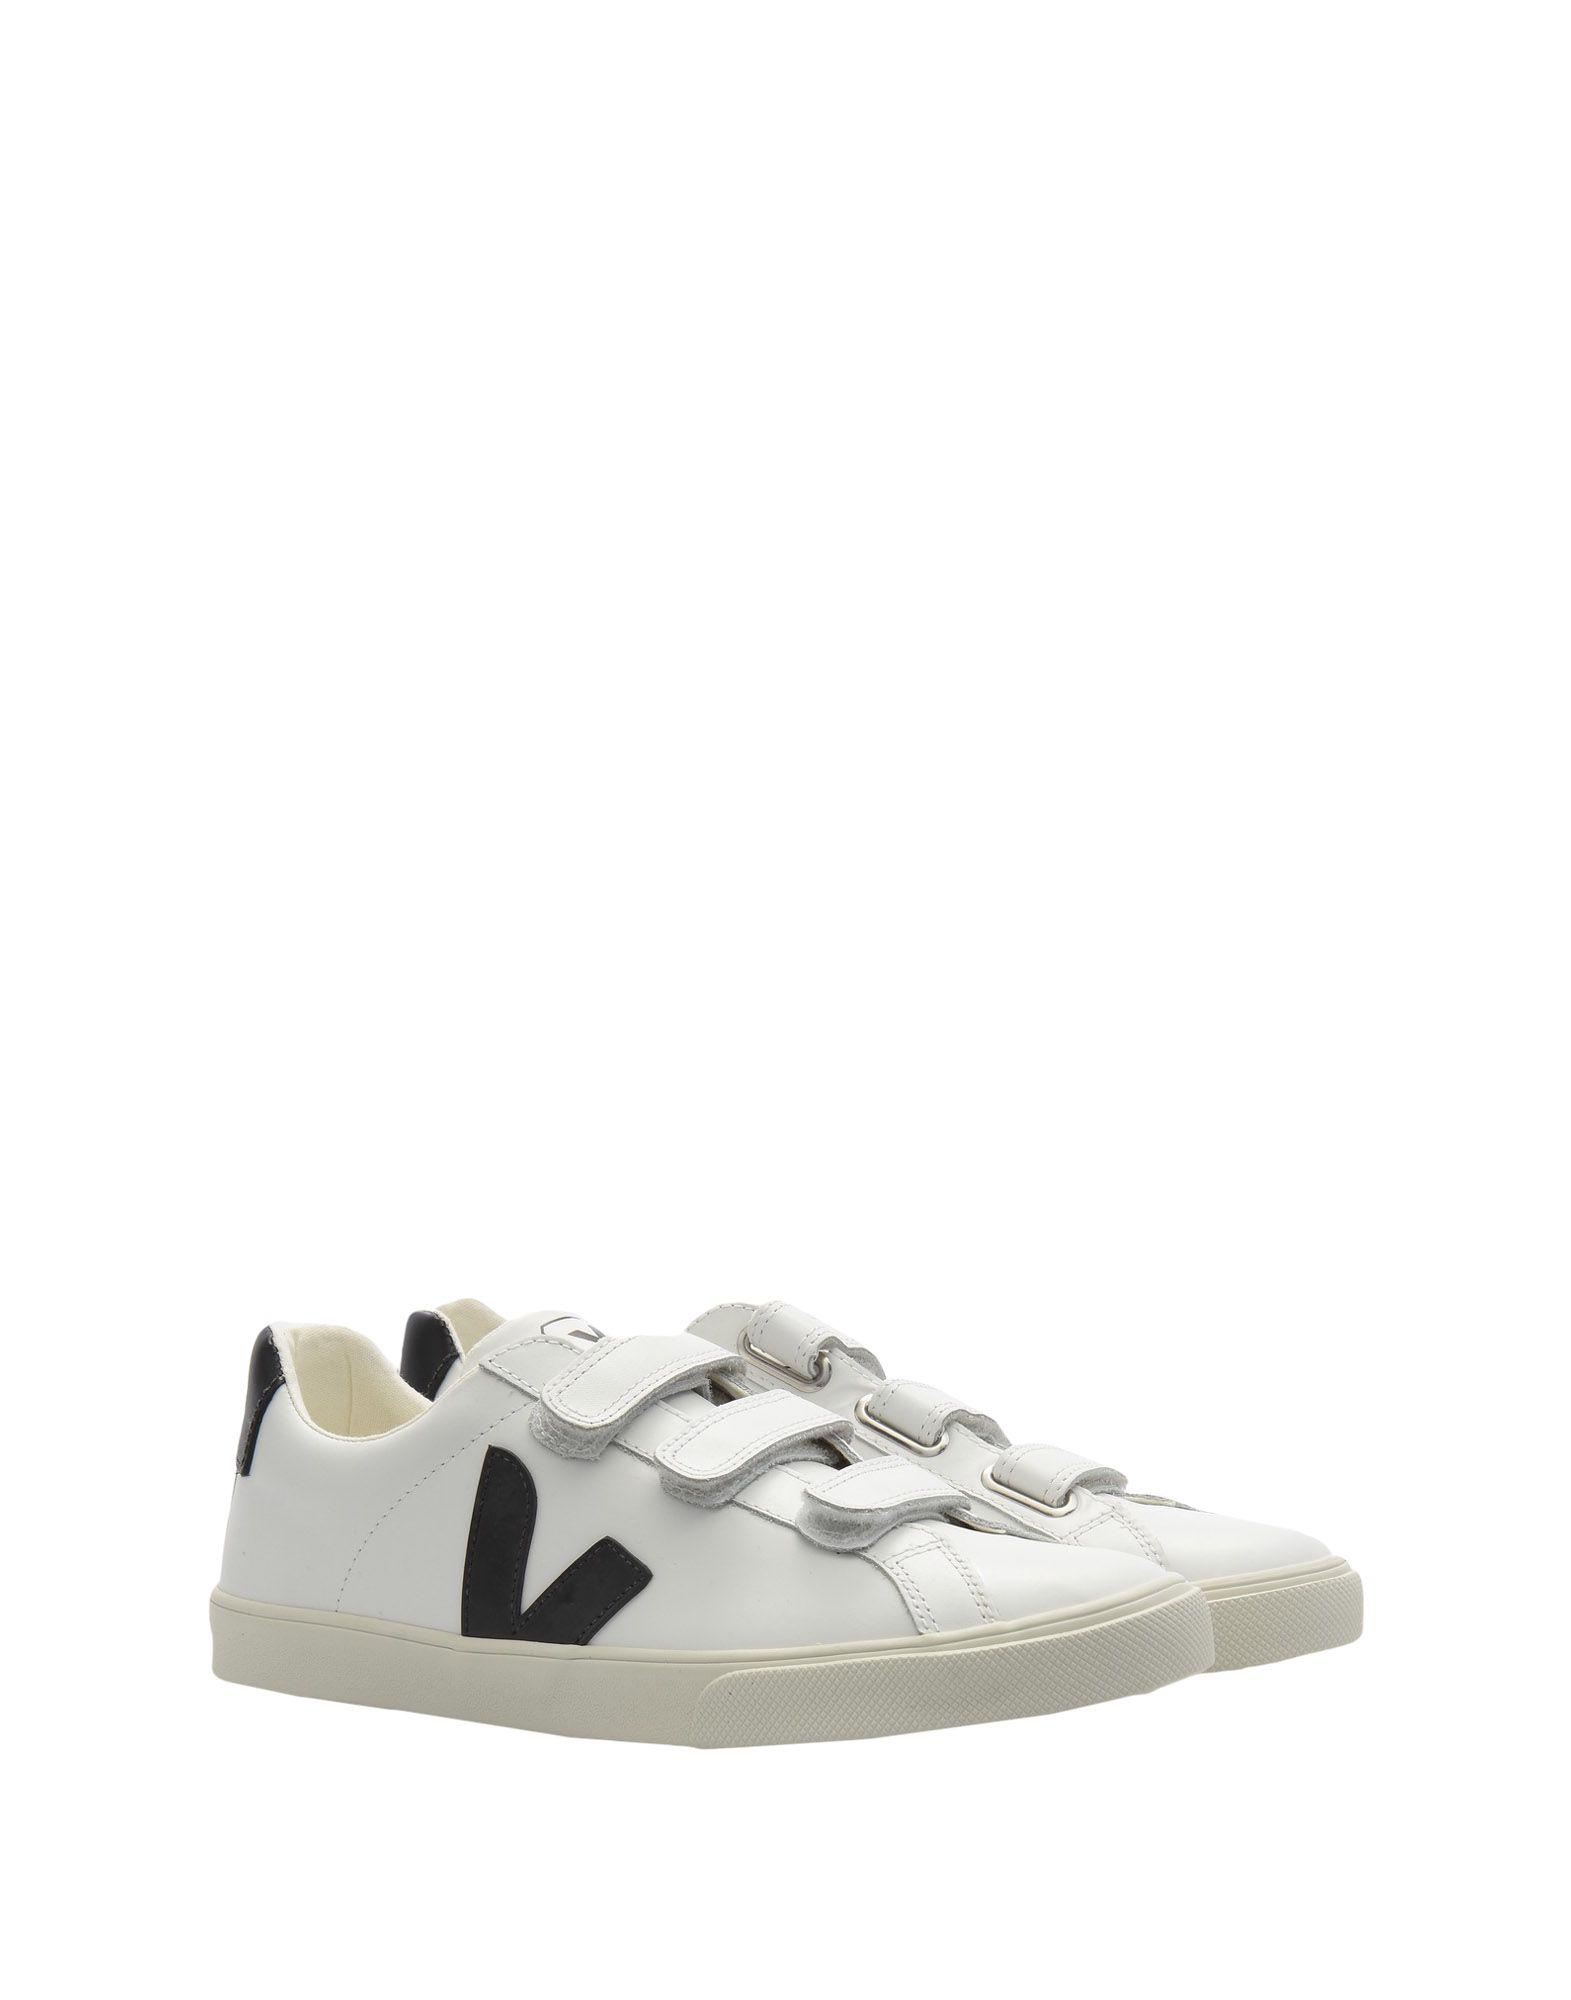 Veja Cotton Low-tops & Sneakers in White - Lyst